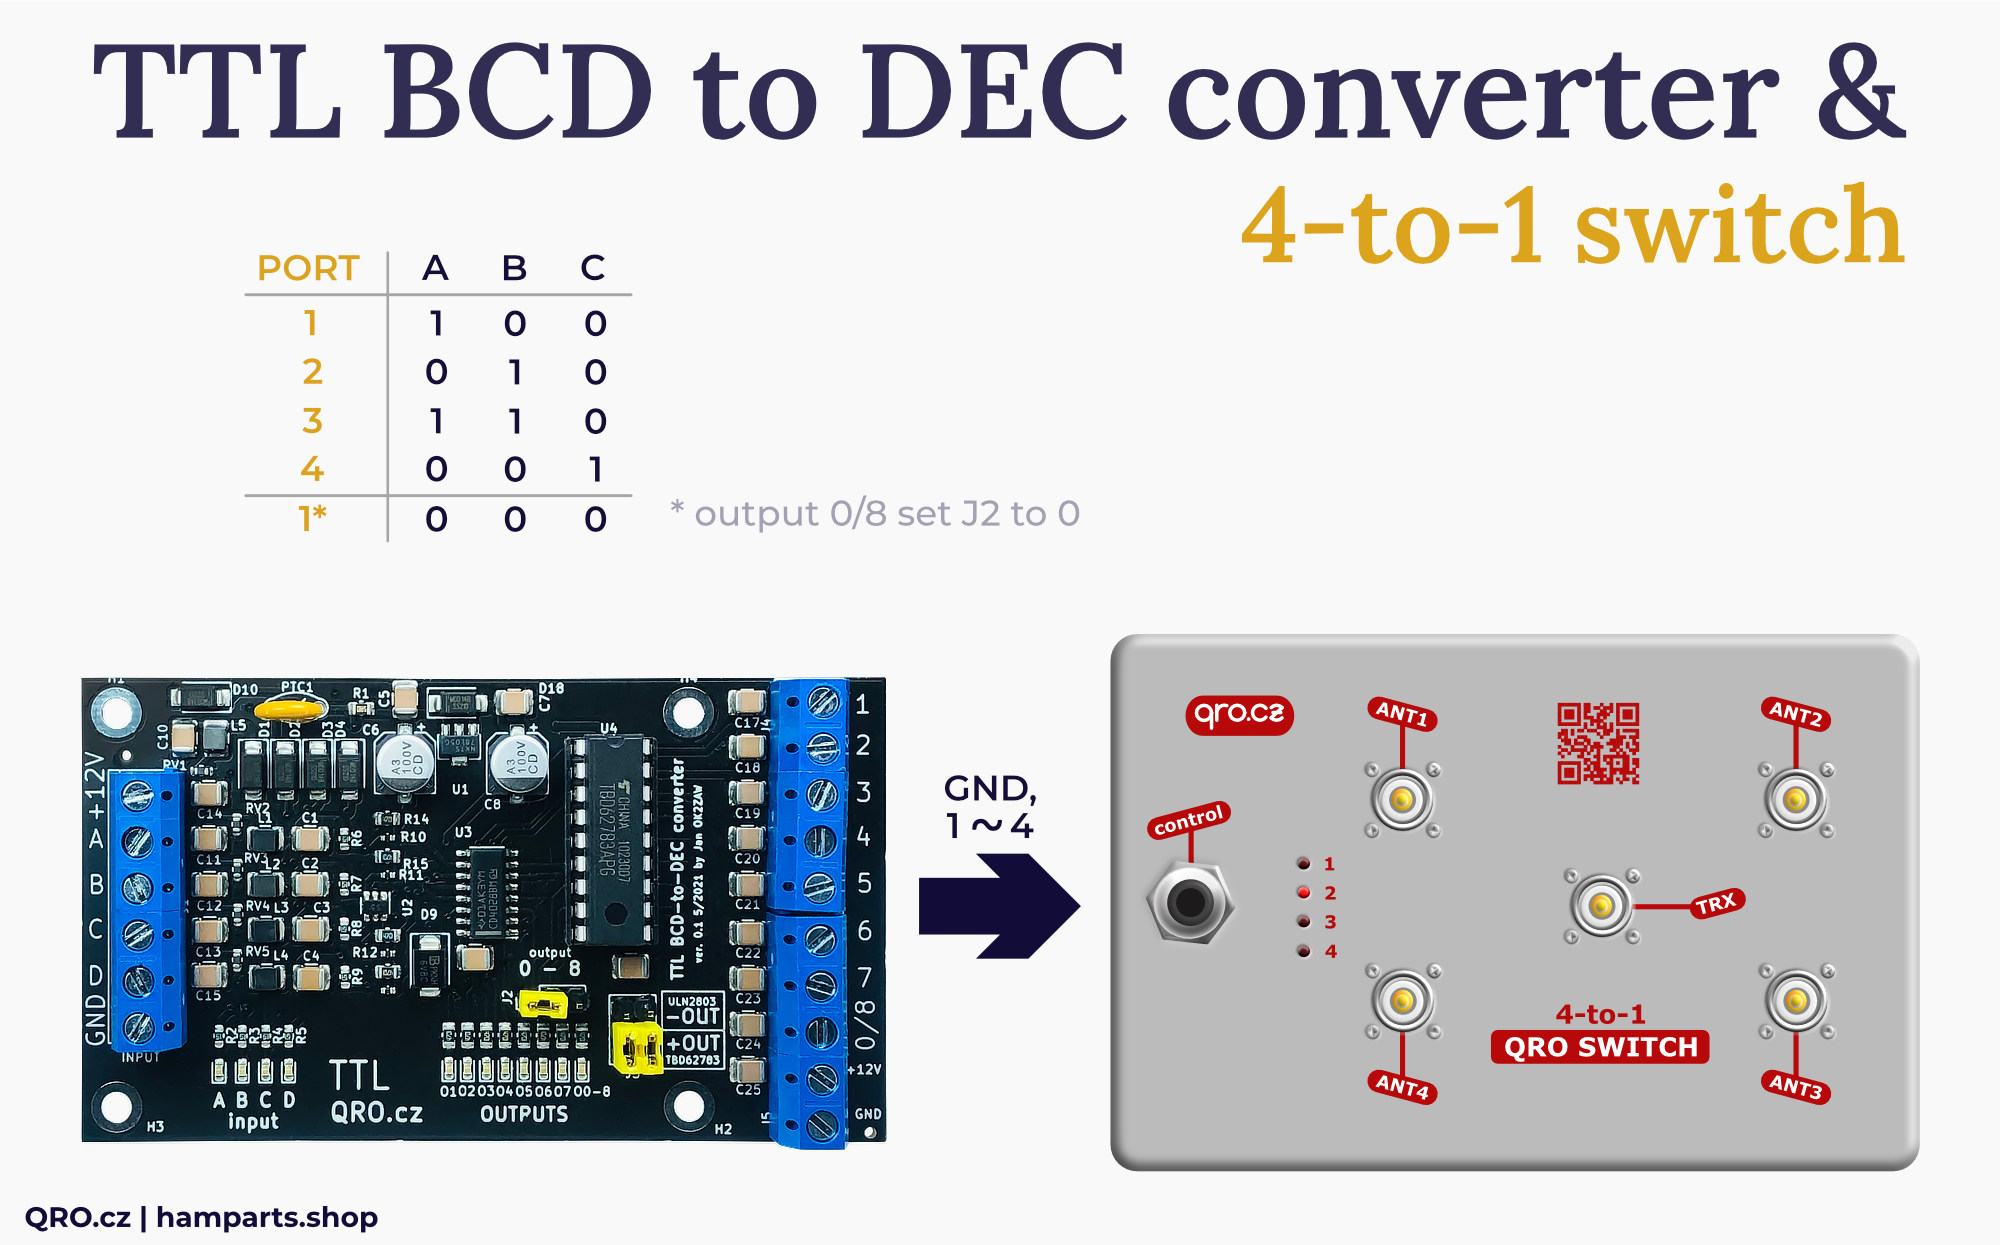 BCD to DEC TTL version converter with 6 to 1 antenna switch by qro.cz hamparts.shop